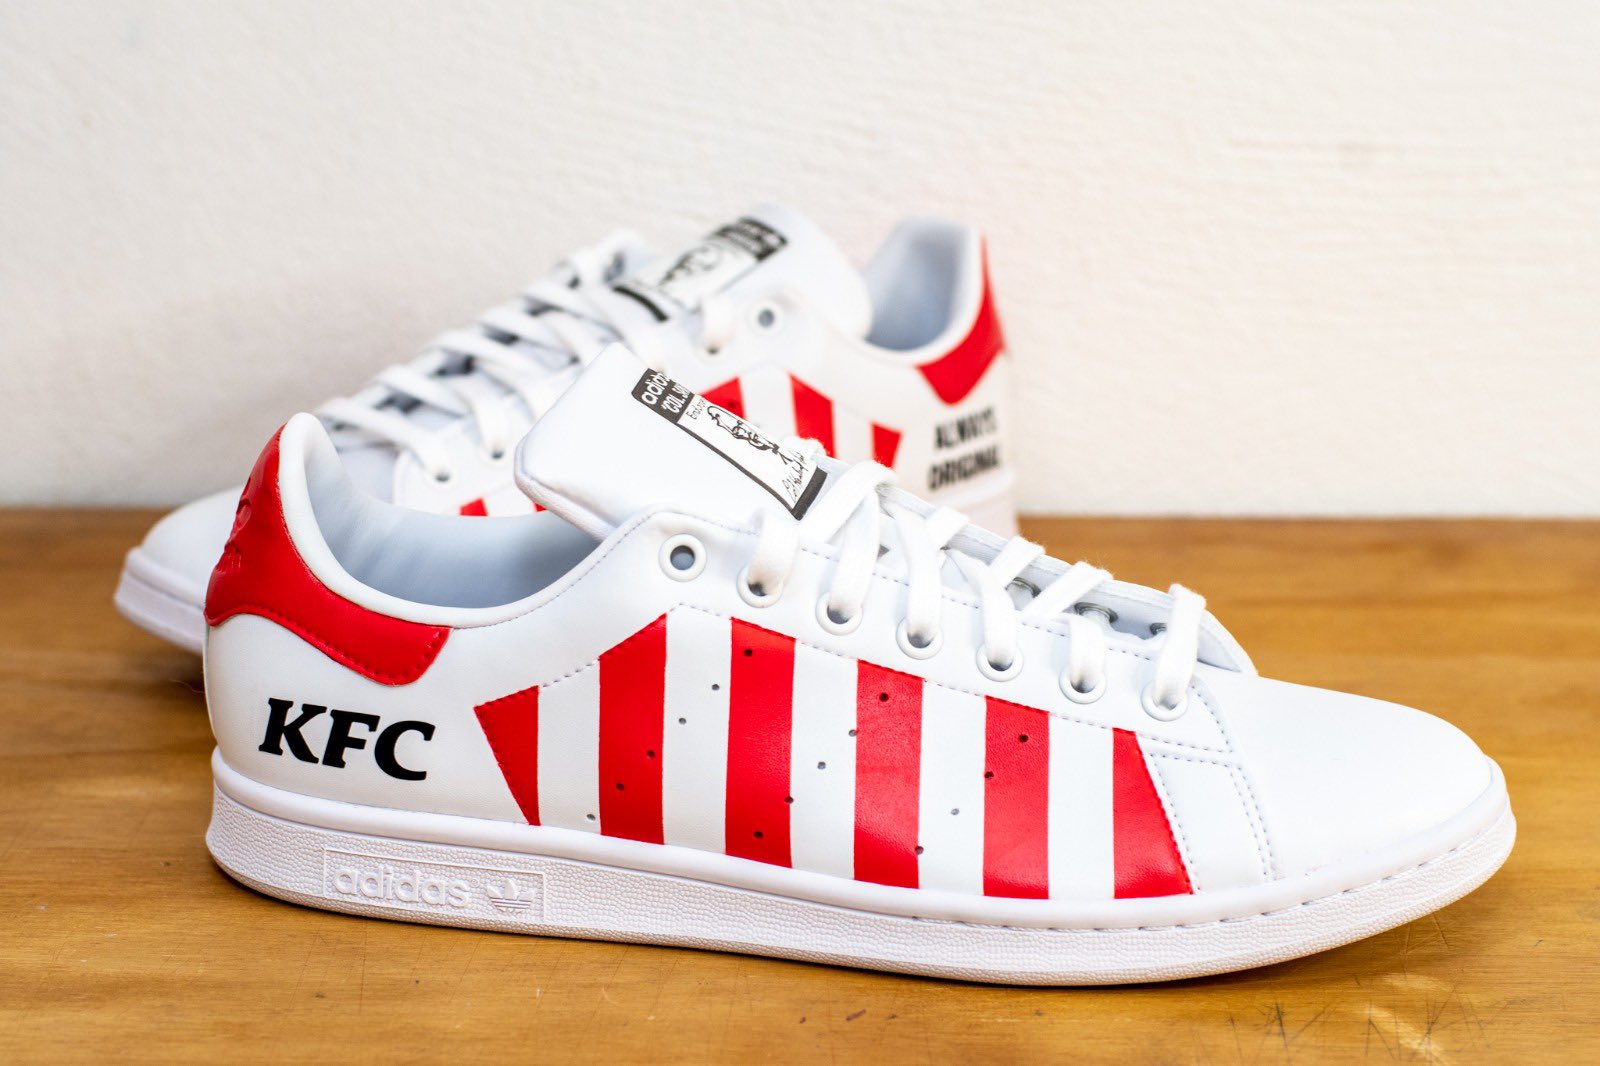 viva Ordenador portátil Oficiales The Shoe Dr. on Twitter: "KFC X THE SHOE DR. The biggest single project  I've done yet! 70 pairs of handcrafted custom sneakers for @KFC_UKI I based  the design on the iconic